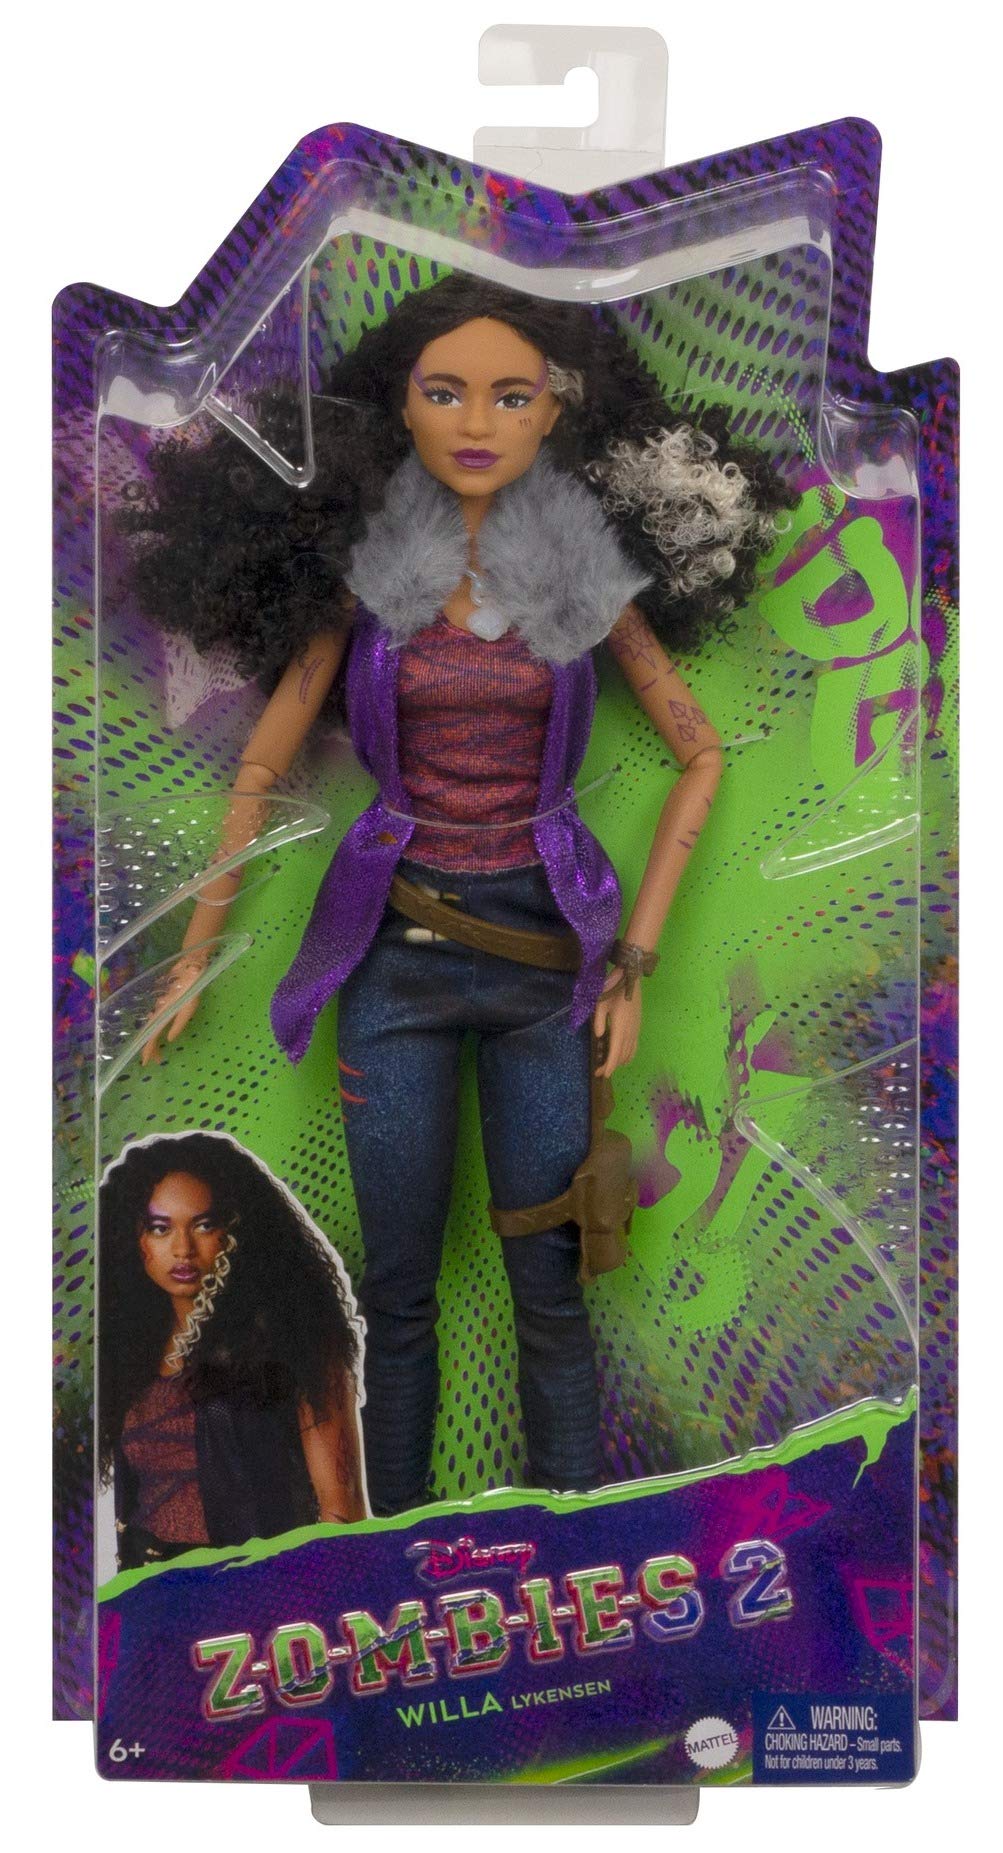 Disney’s Zombies 2, Willa Lykensen Werewolf Doll (11.5-inch) wearing Rocker Outfit and Accessories, 11 Bendable “Joints,” Great Gift for ages 5+ [Amazon Exclusive]